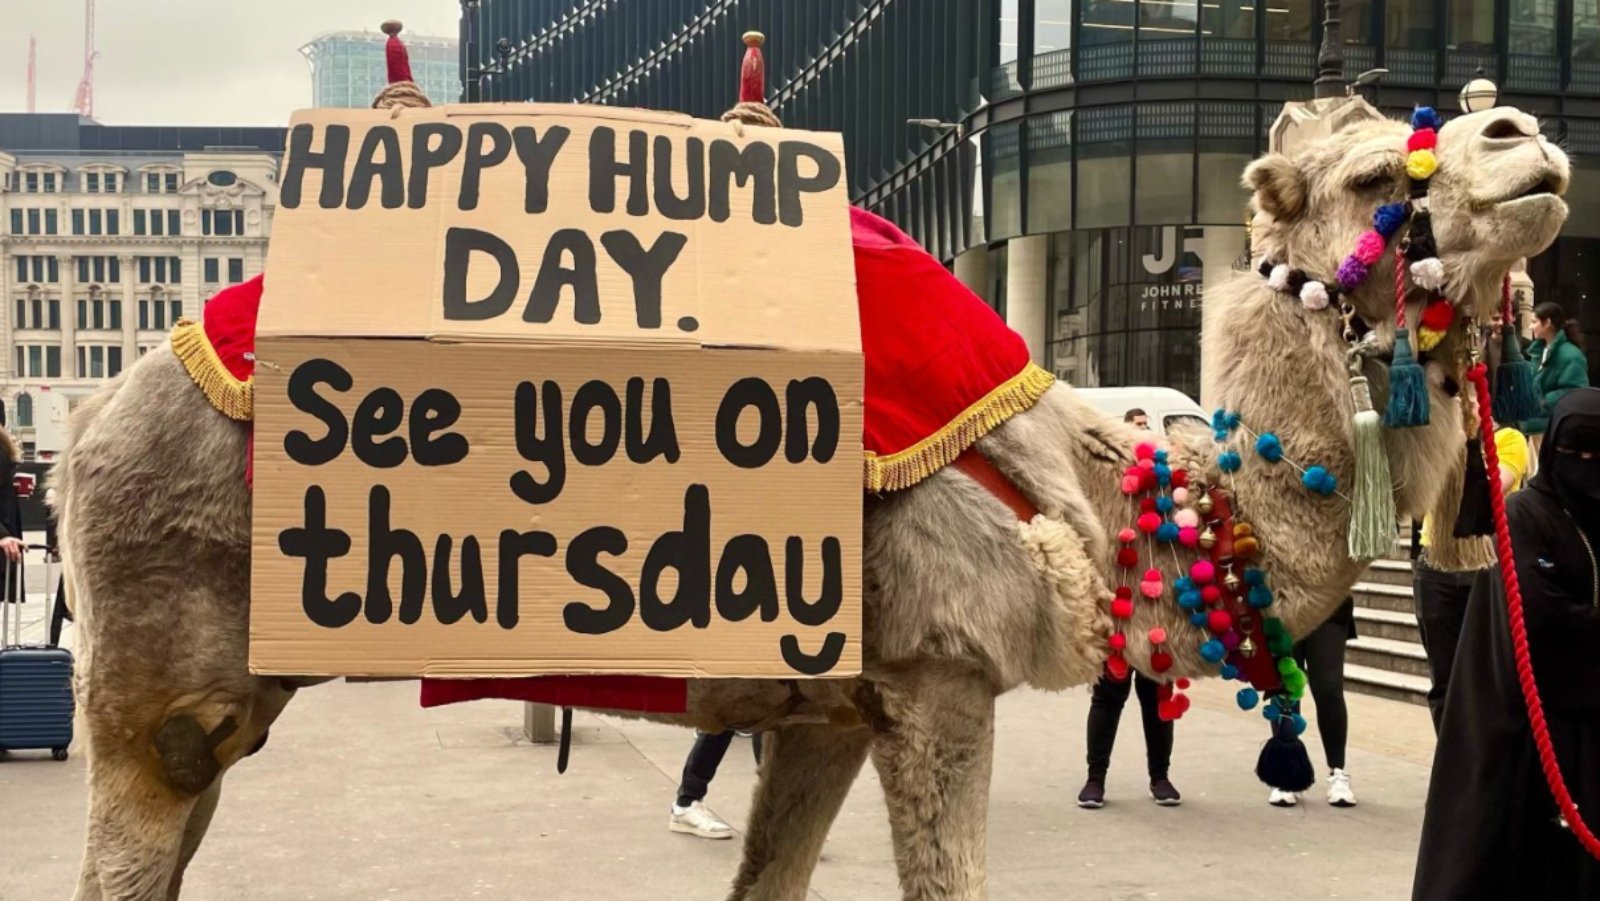 a camel outside liverpool street station with a bilboardwhich reads happy hump day see you on thursday